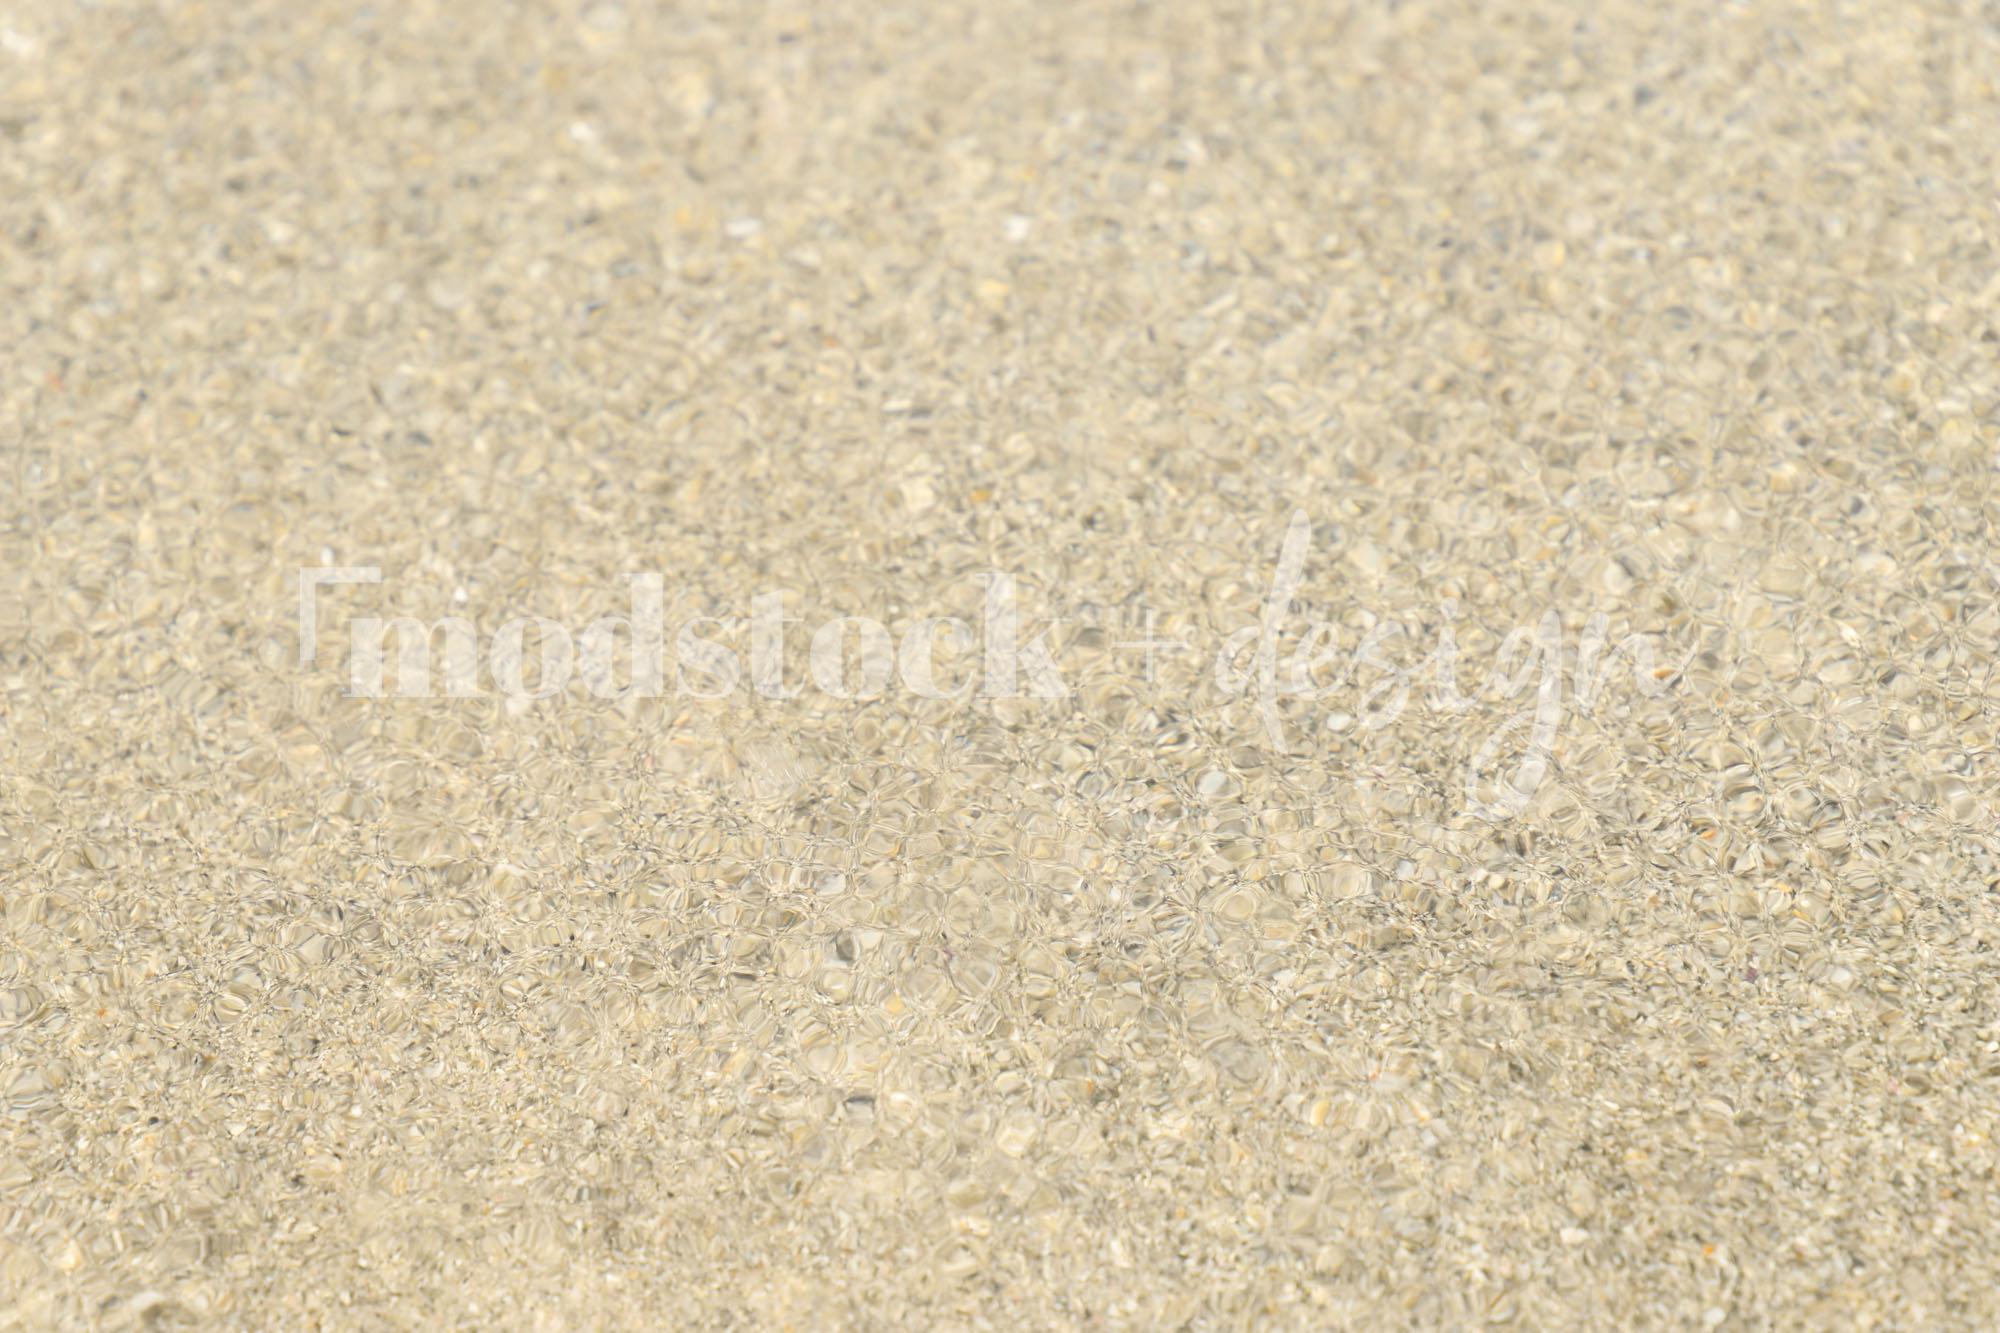 Water and Sand Textures 08